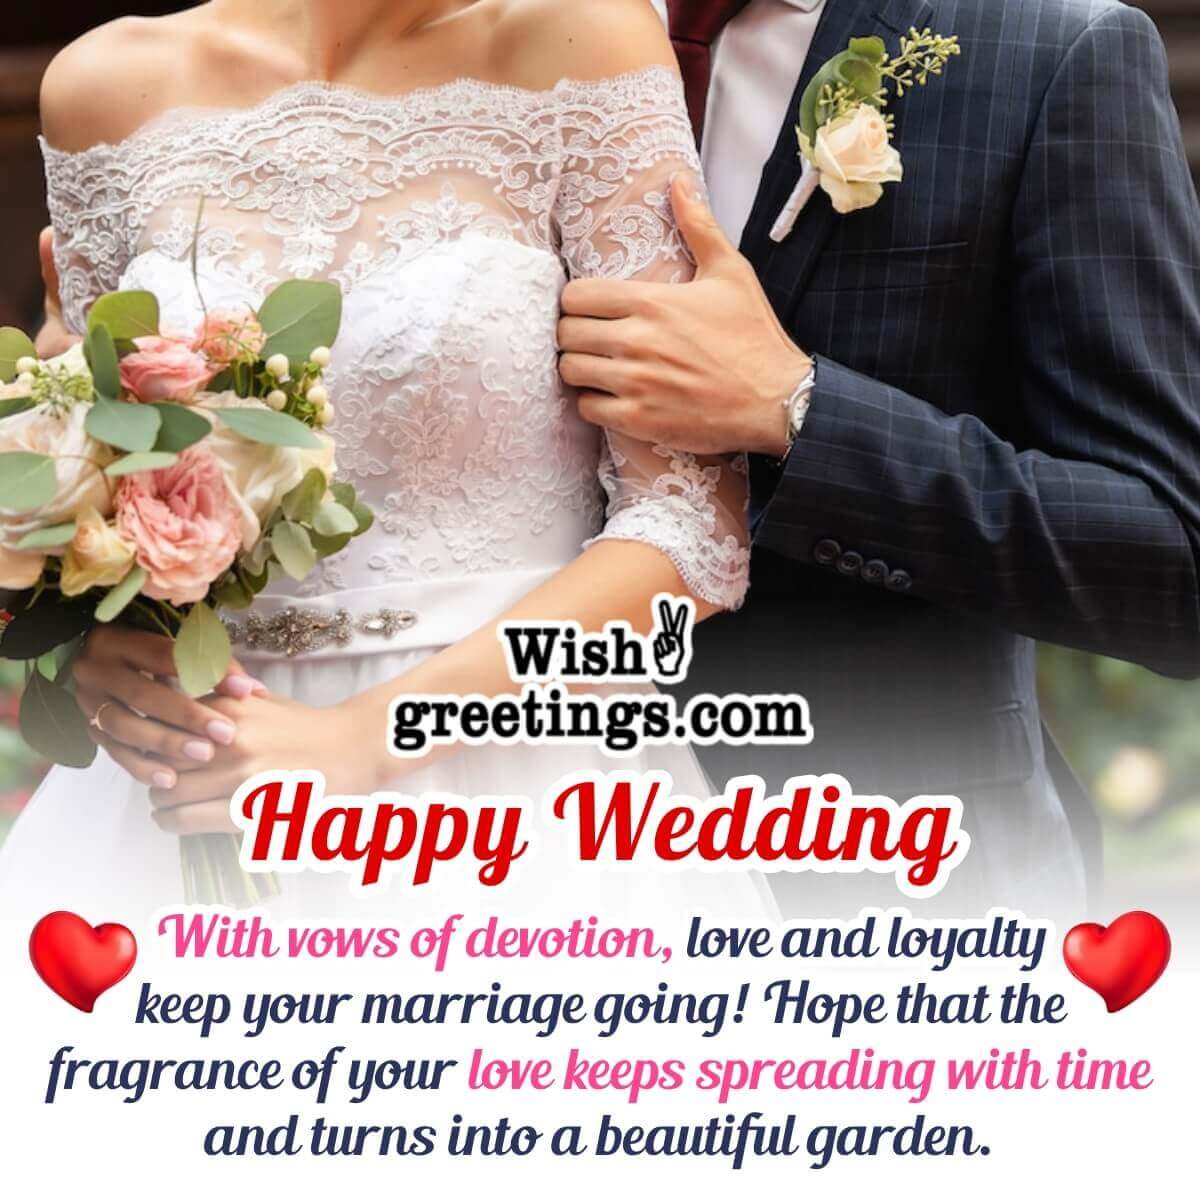 Christian Wedding Wish Picture